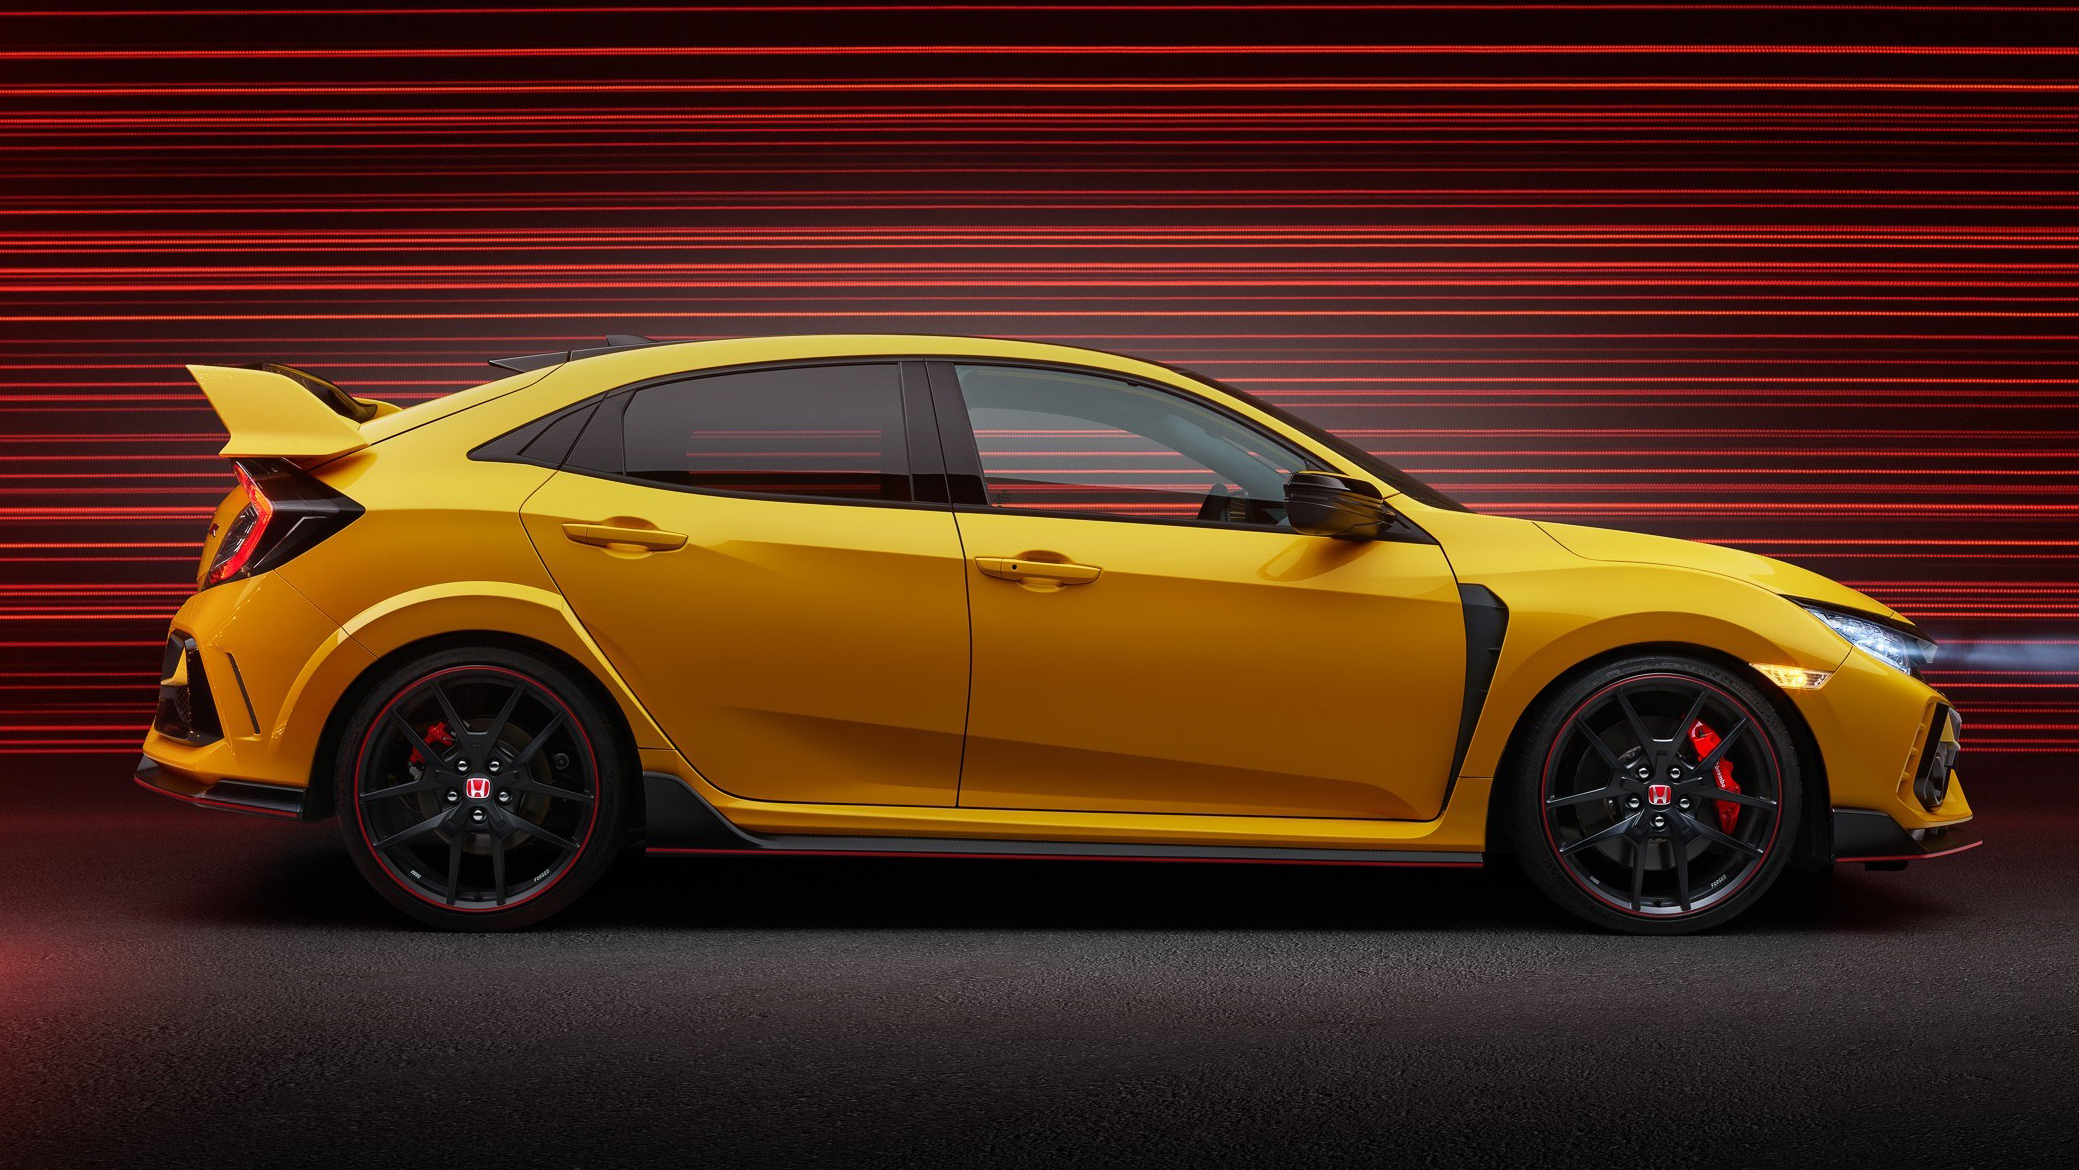 Honda Civic Type R HD Wallpaper and Background